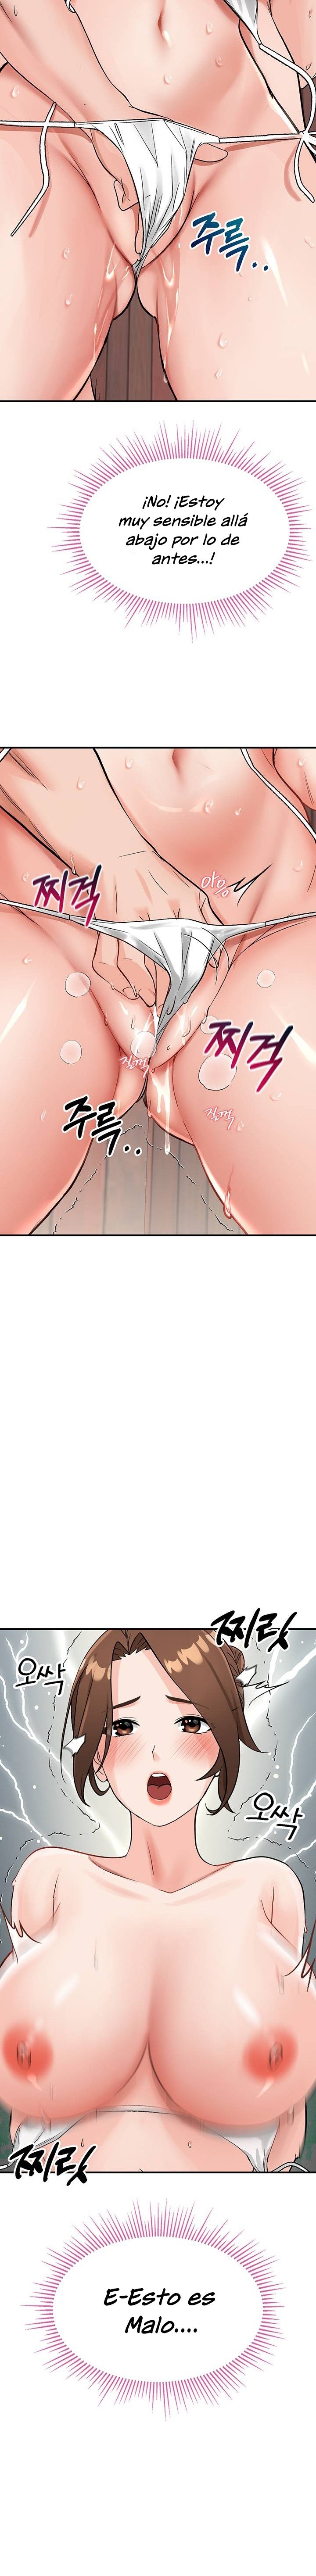 mother-son-island-survival-raw-chap-3-24